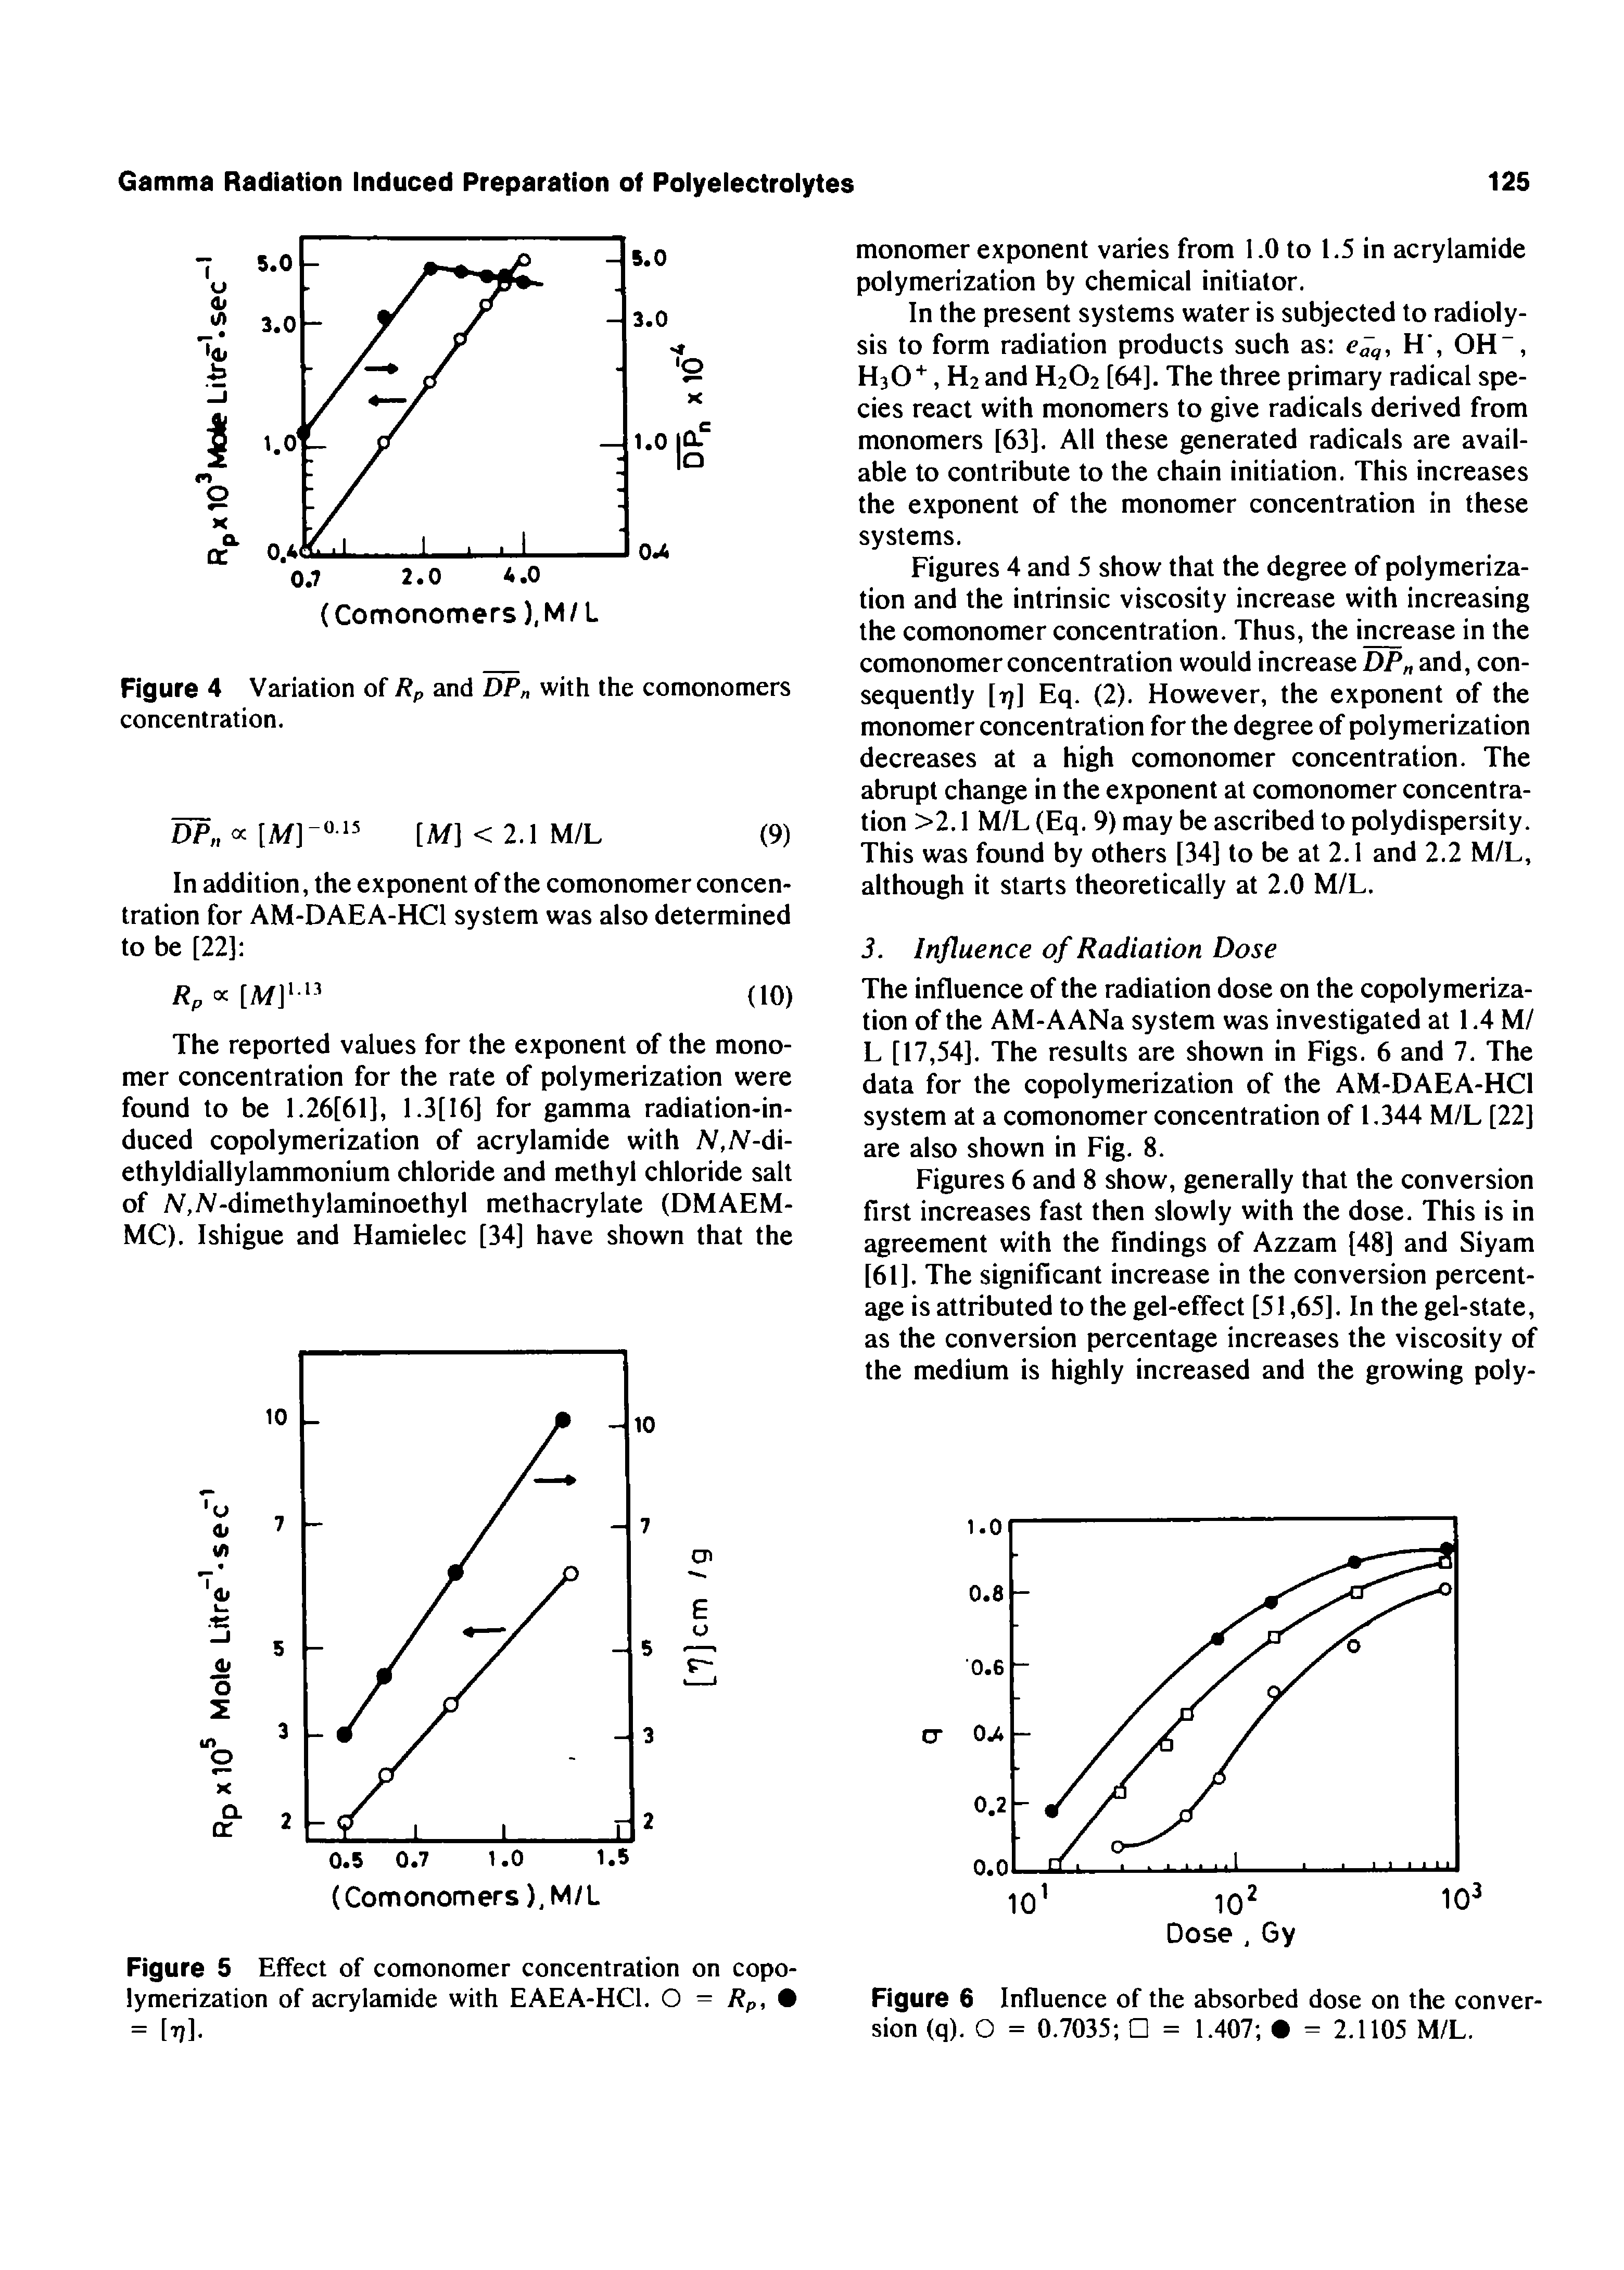 Figure 5 Effect of comonomer concentration on copolymerization of acrylamide with EAEA-HCl. O Rp, % = [tj].